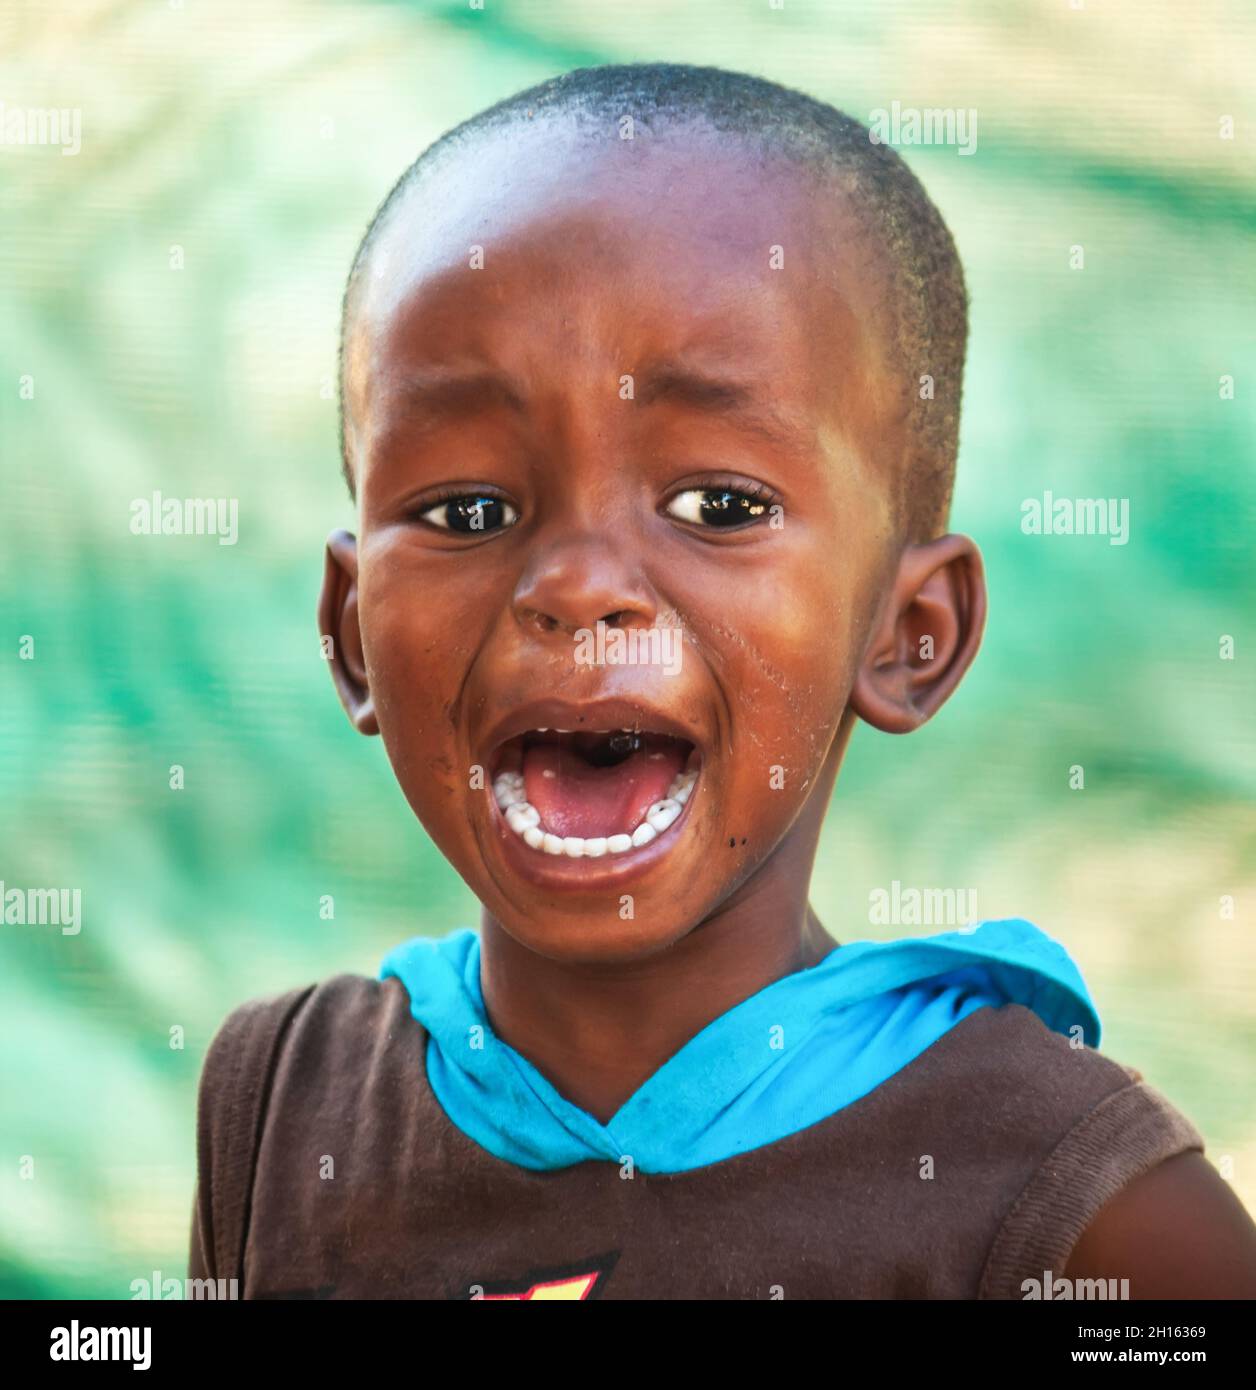 African child portrait in a village in Botswana standing in front of the green fence in the yard, crying Stock Photo